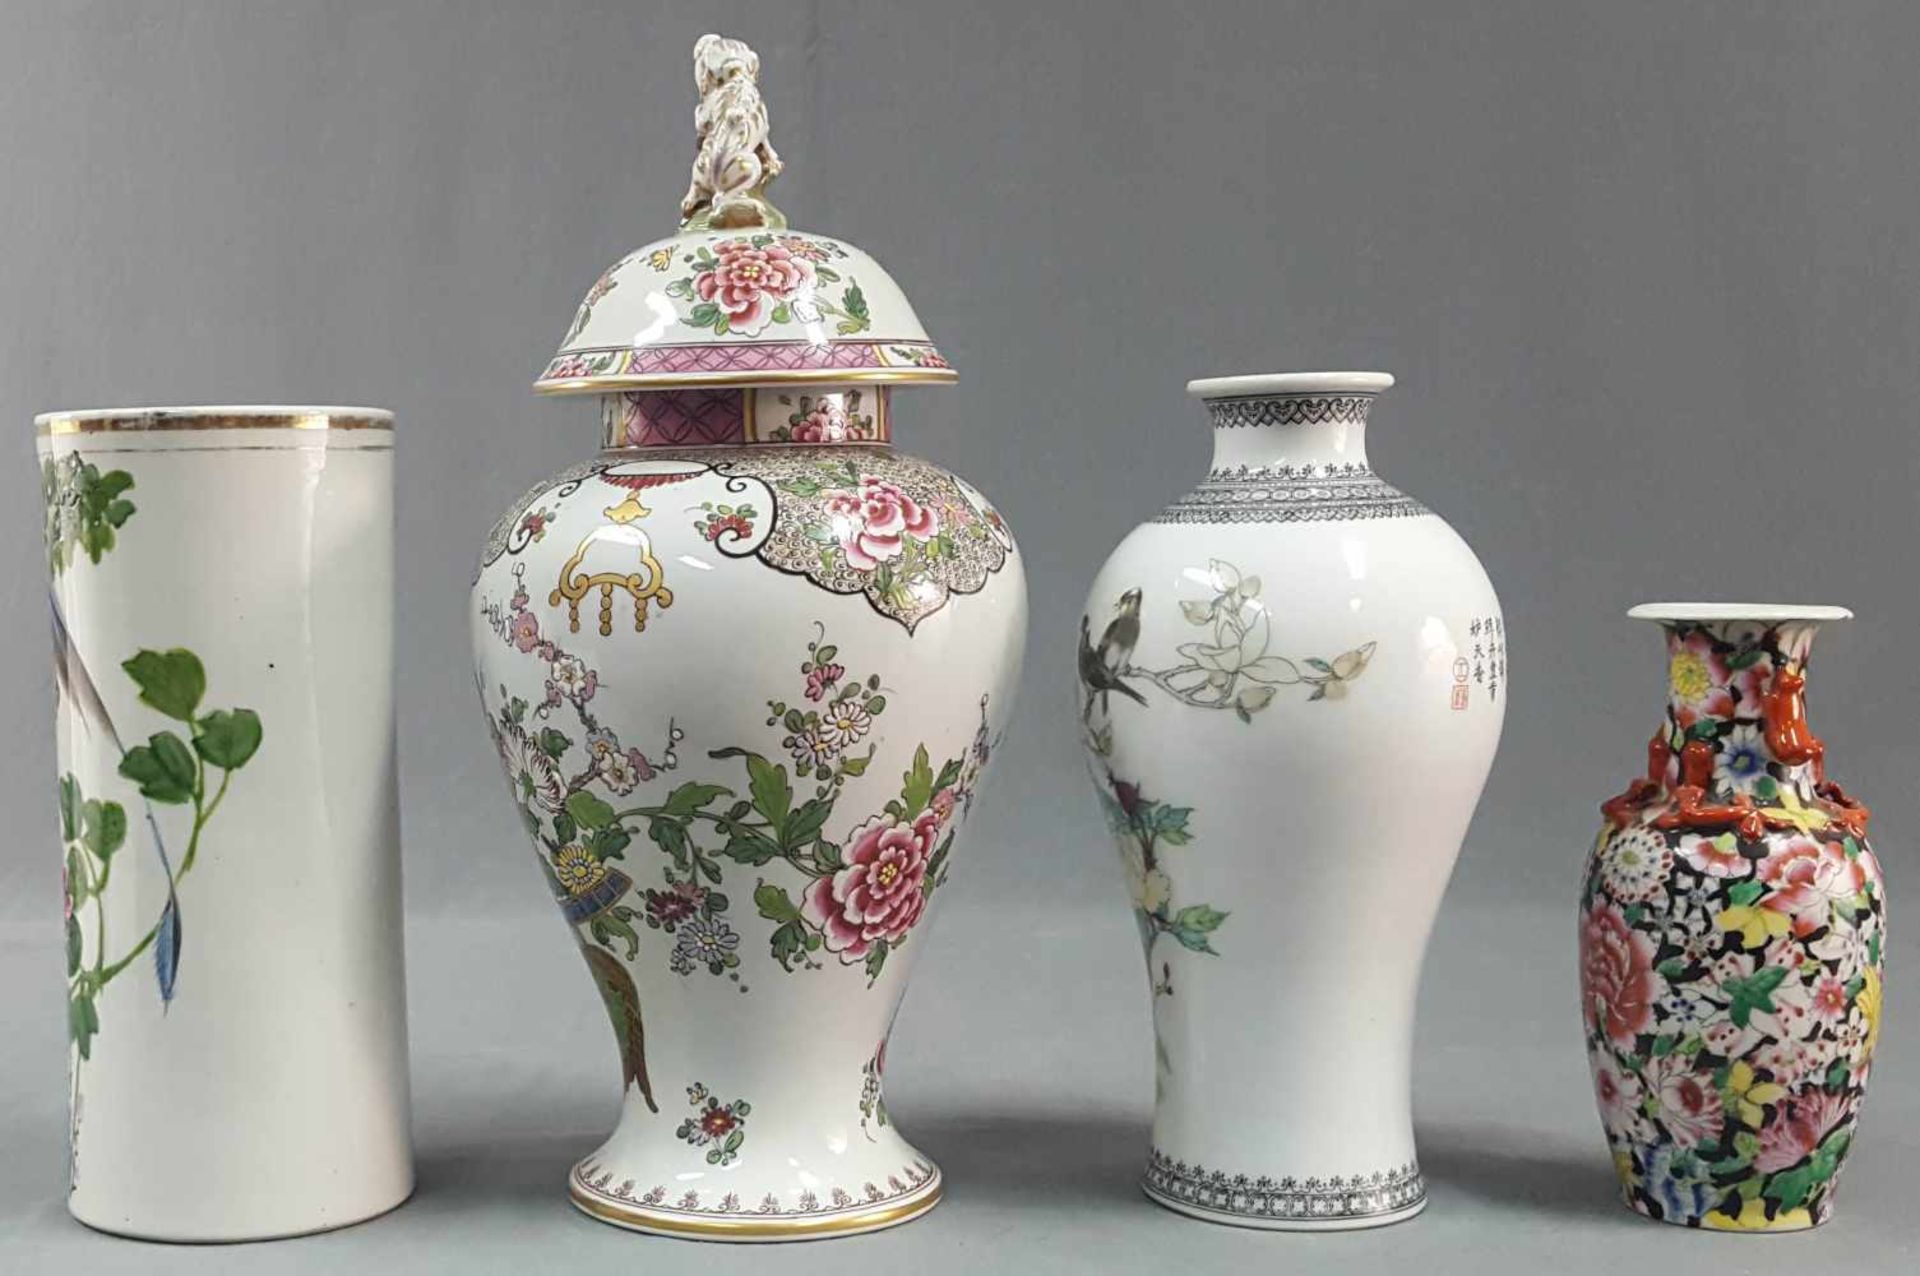 3 vases and 1 lid vase. Proably China. - Image 7 of 14